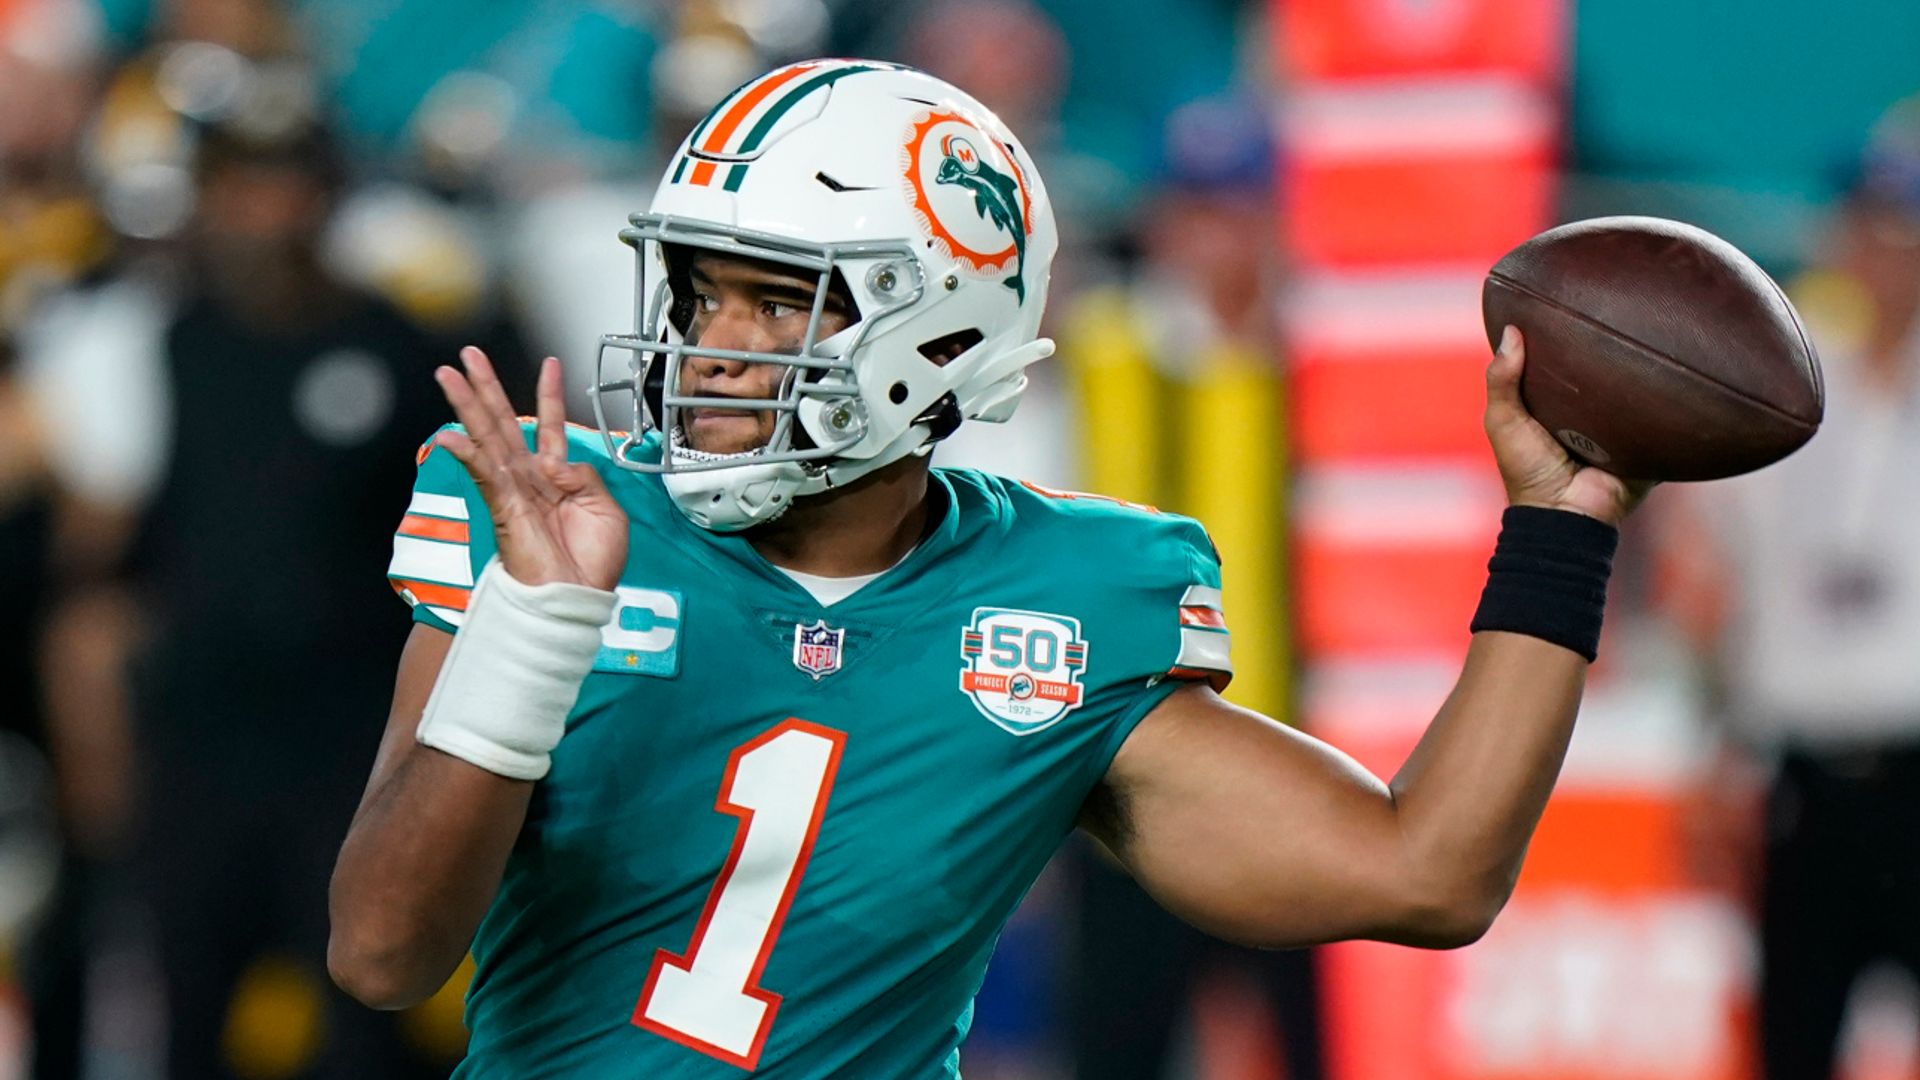 Tagovailoa leads Dolphins to victory over Steelers on return